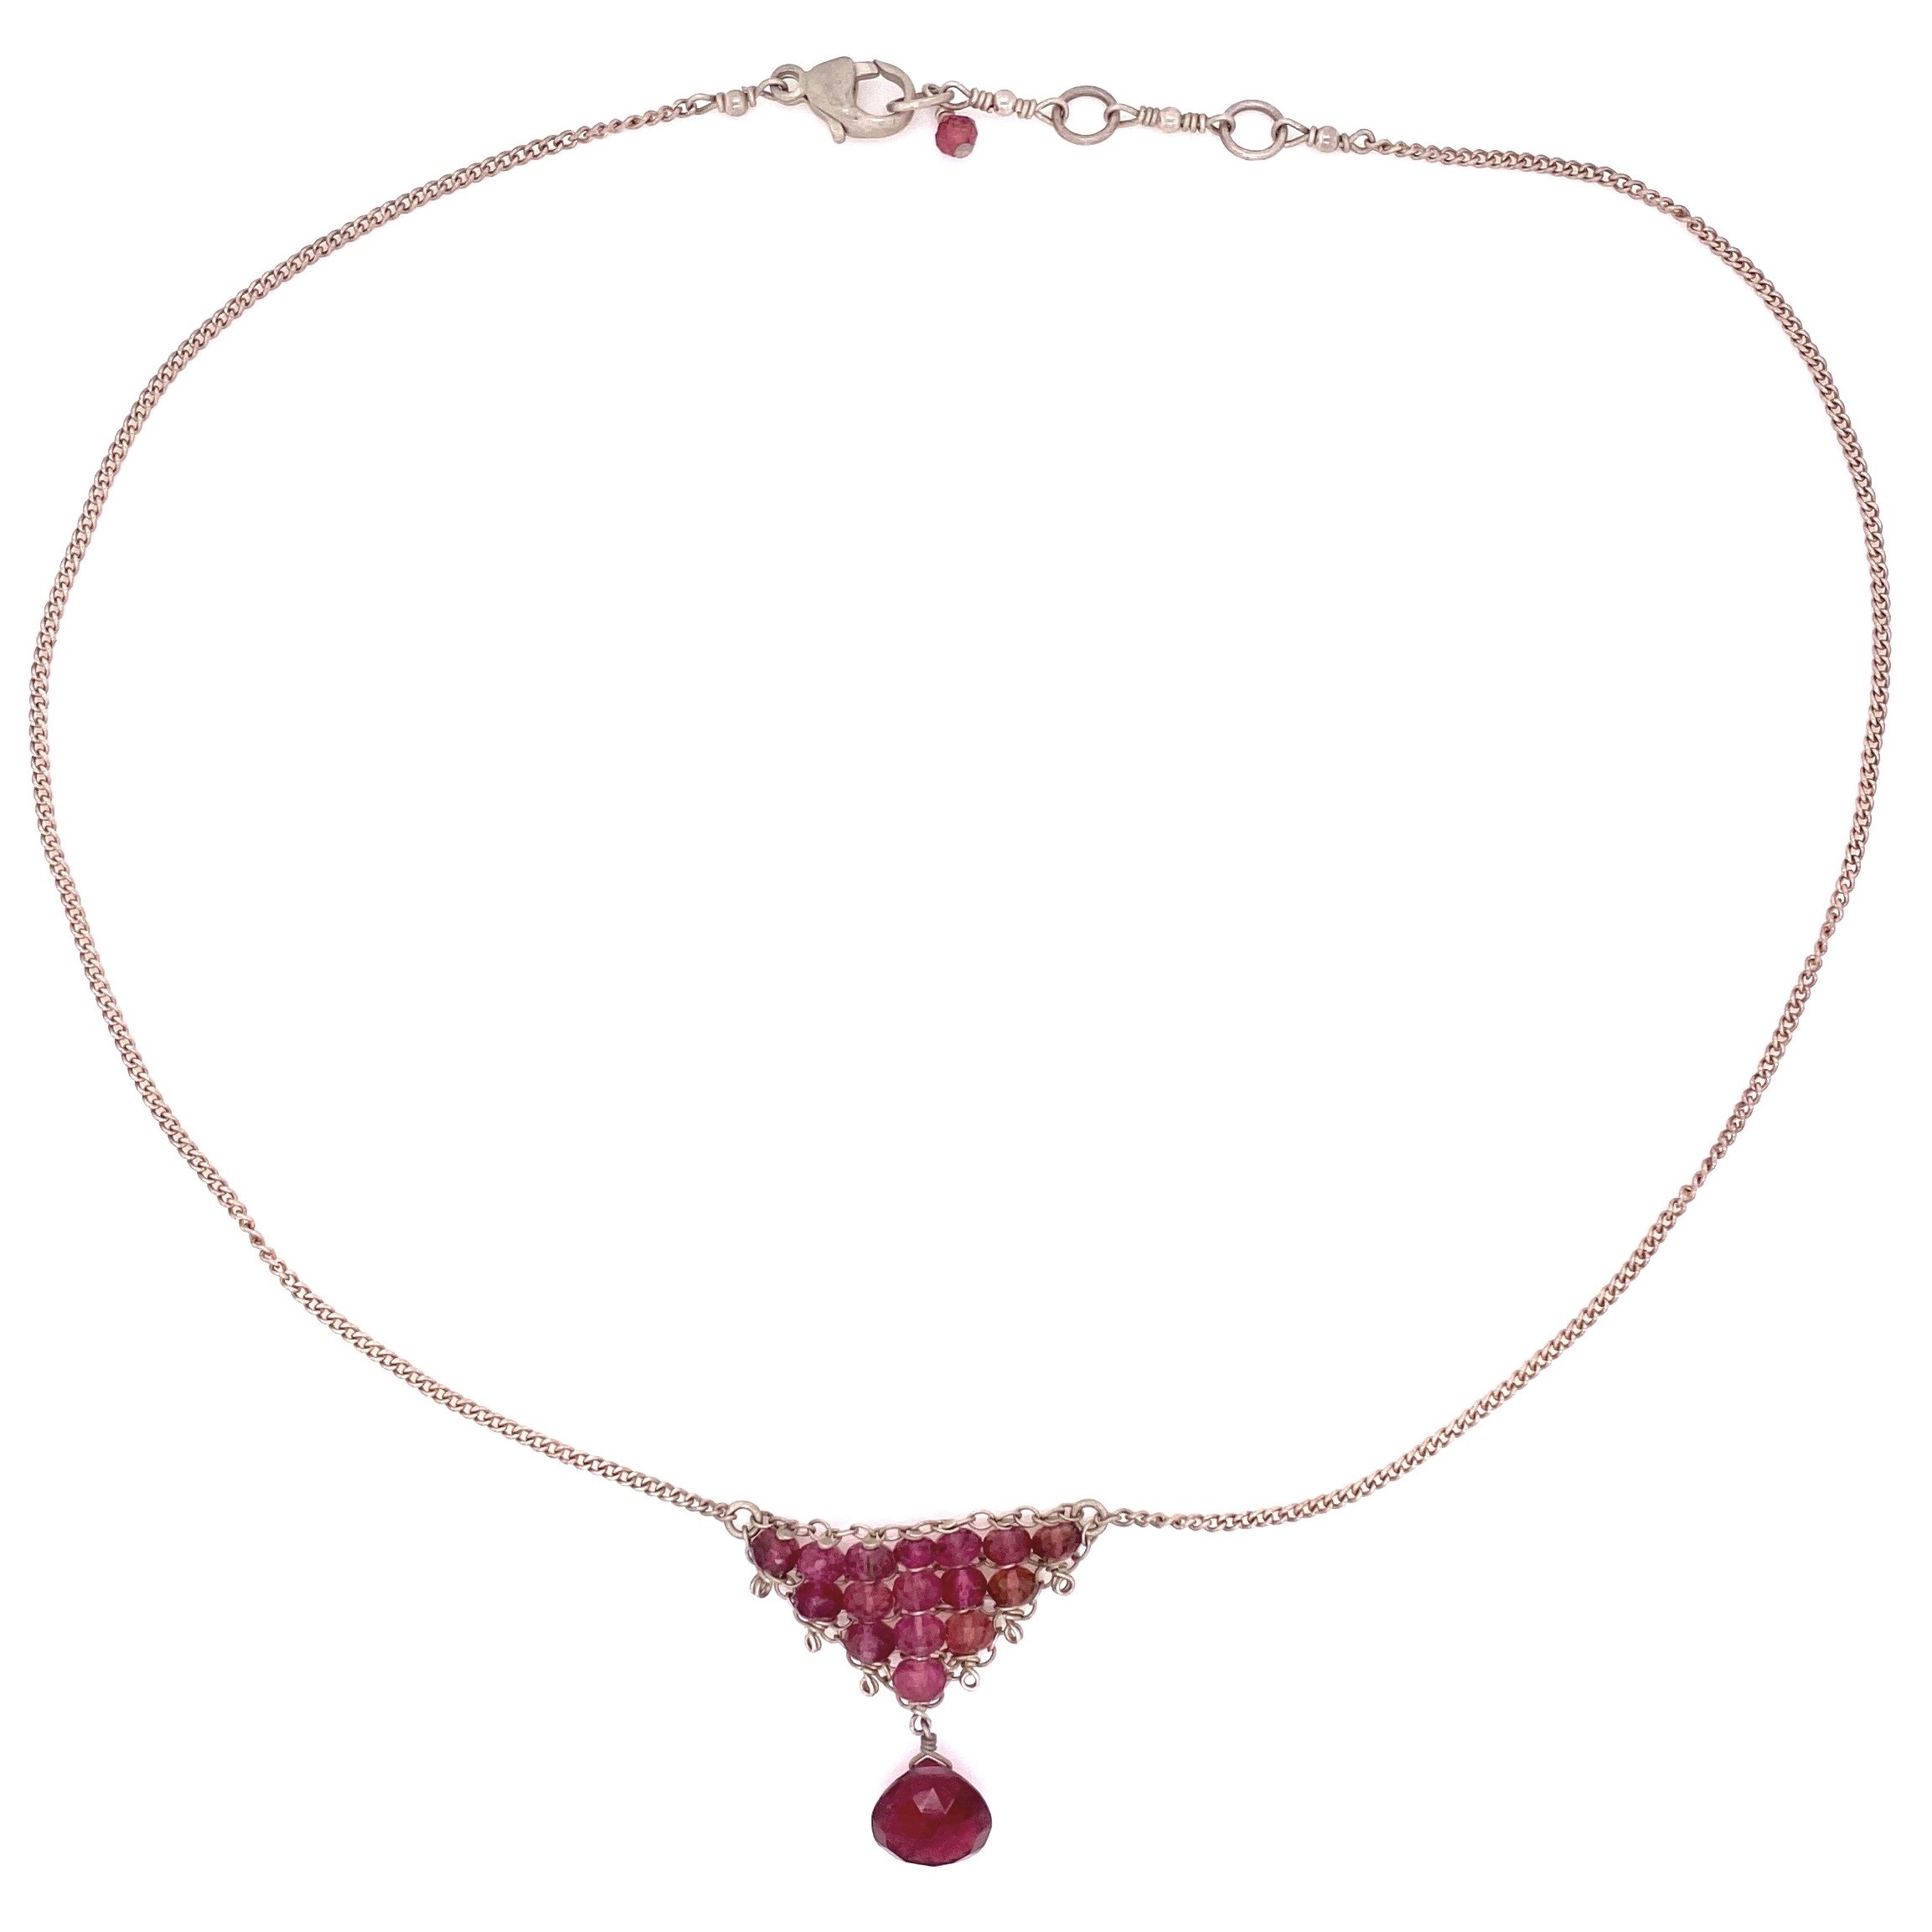 Branch Red Coral Necklace with Sterling Clasp 18.5